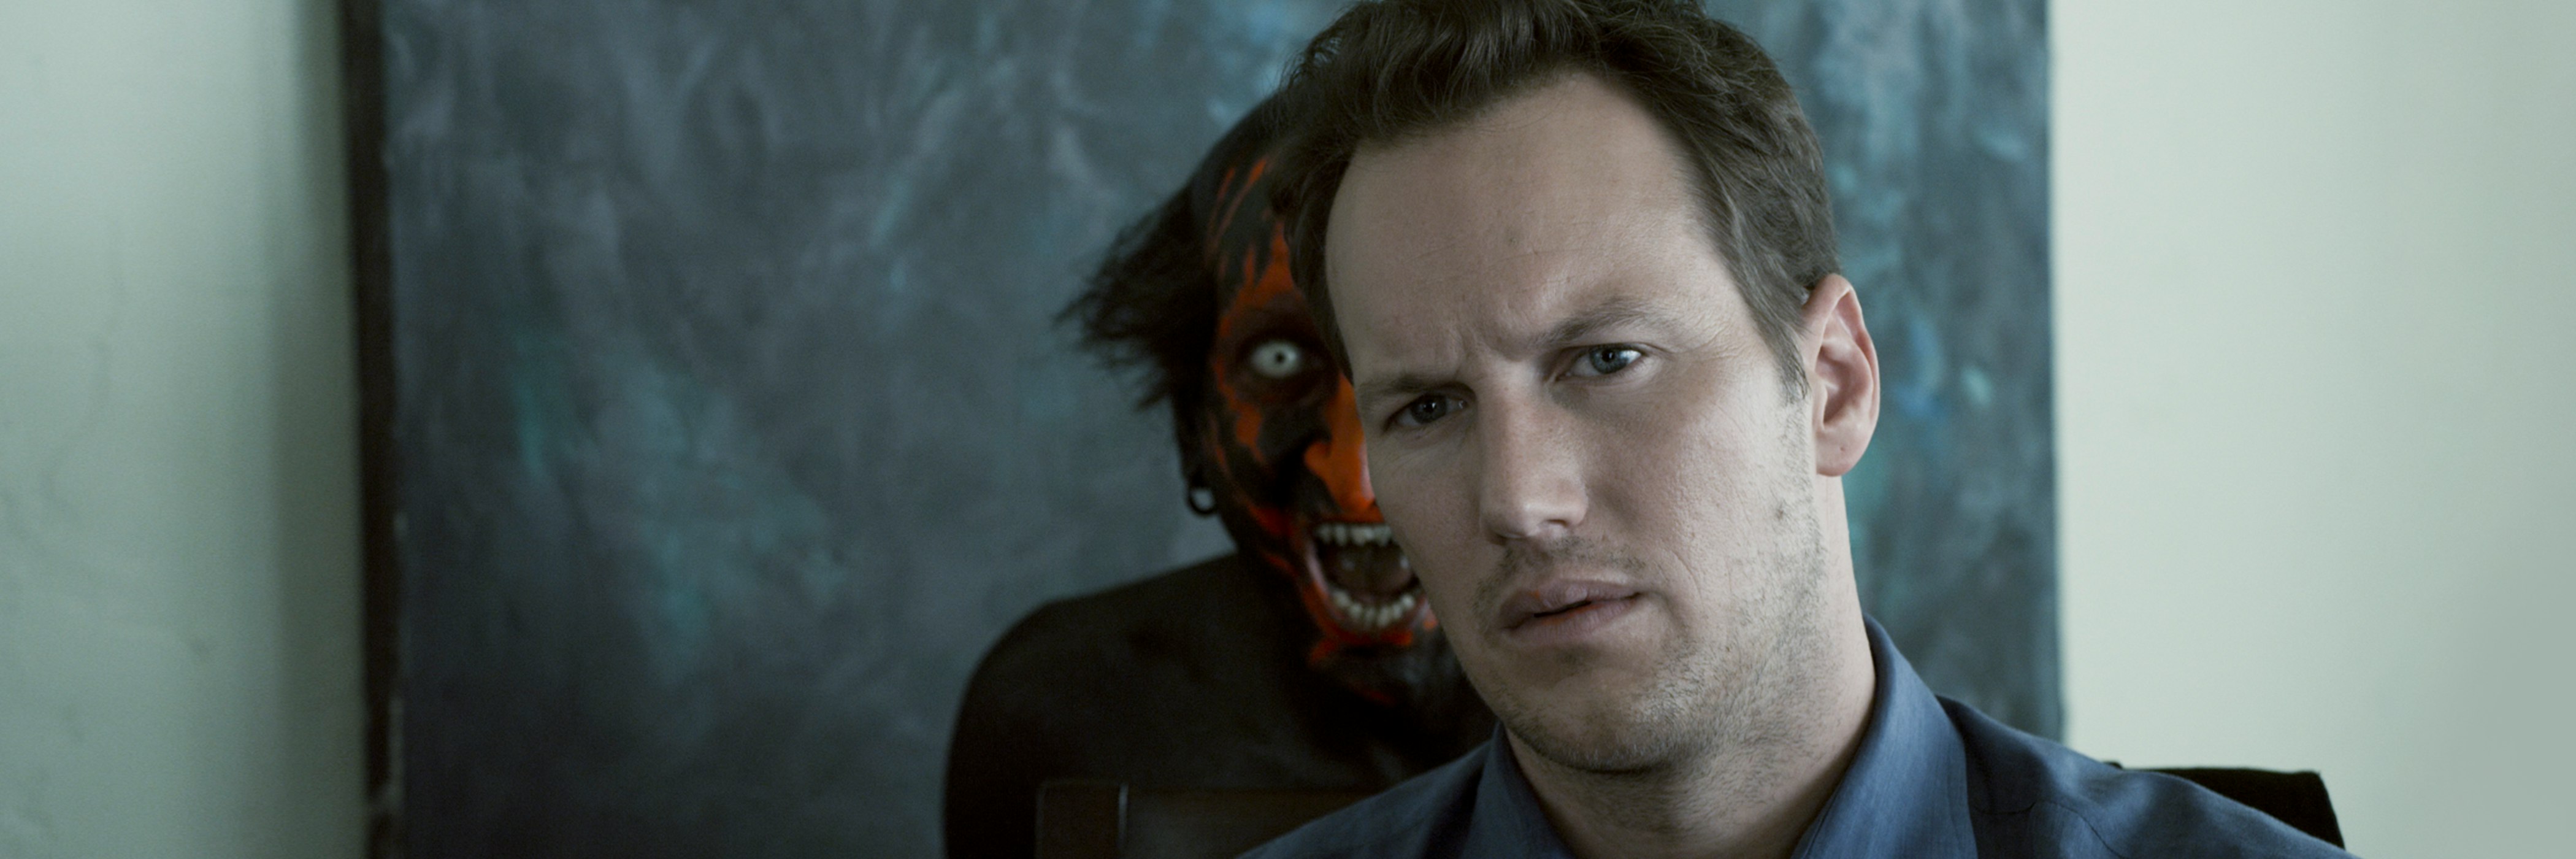 INSIDIOUS: THE RED DOOR – Final Trailer (HD) - YouTube